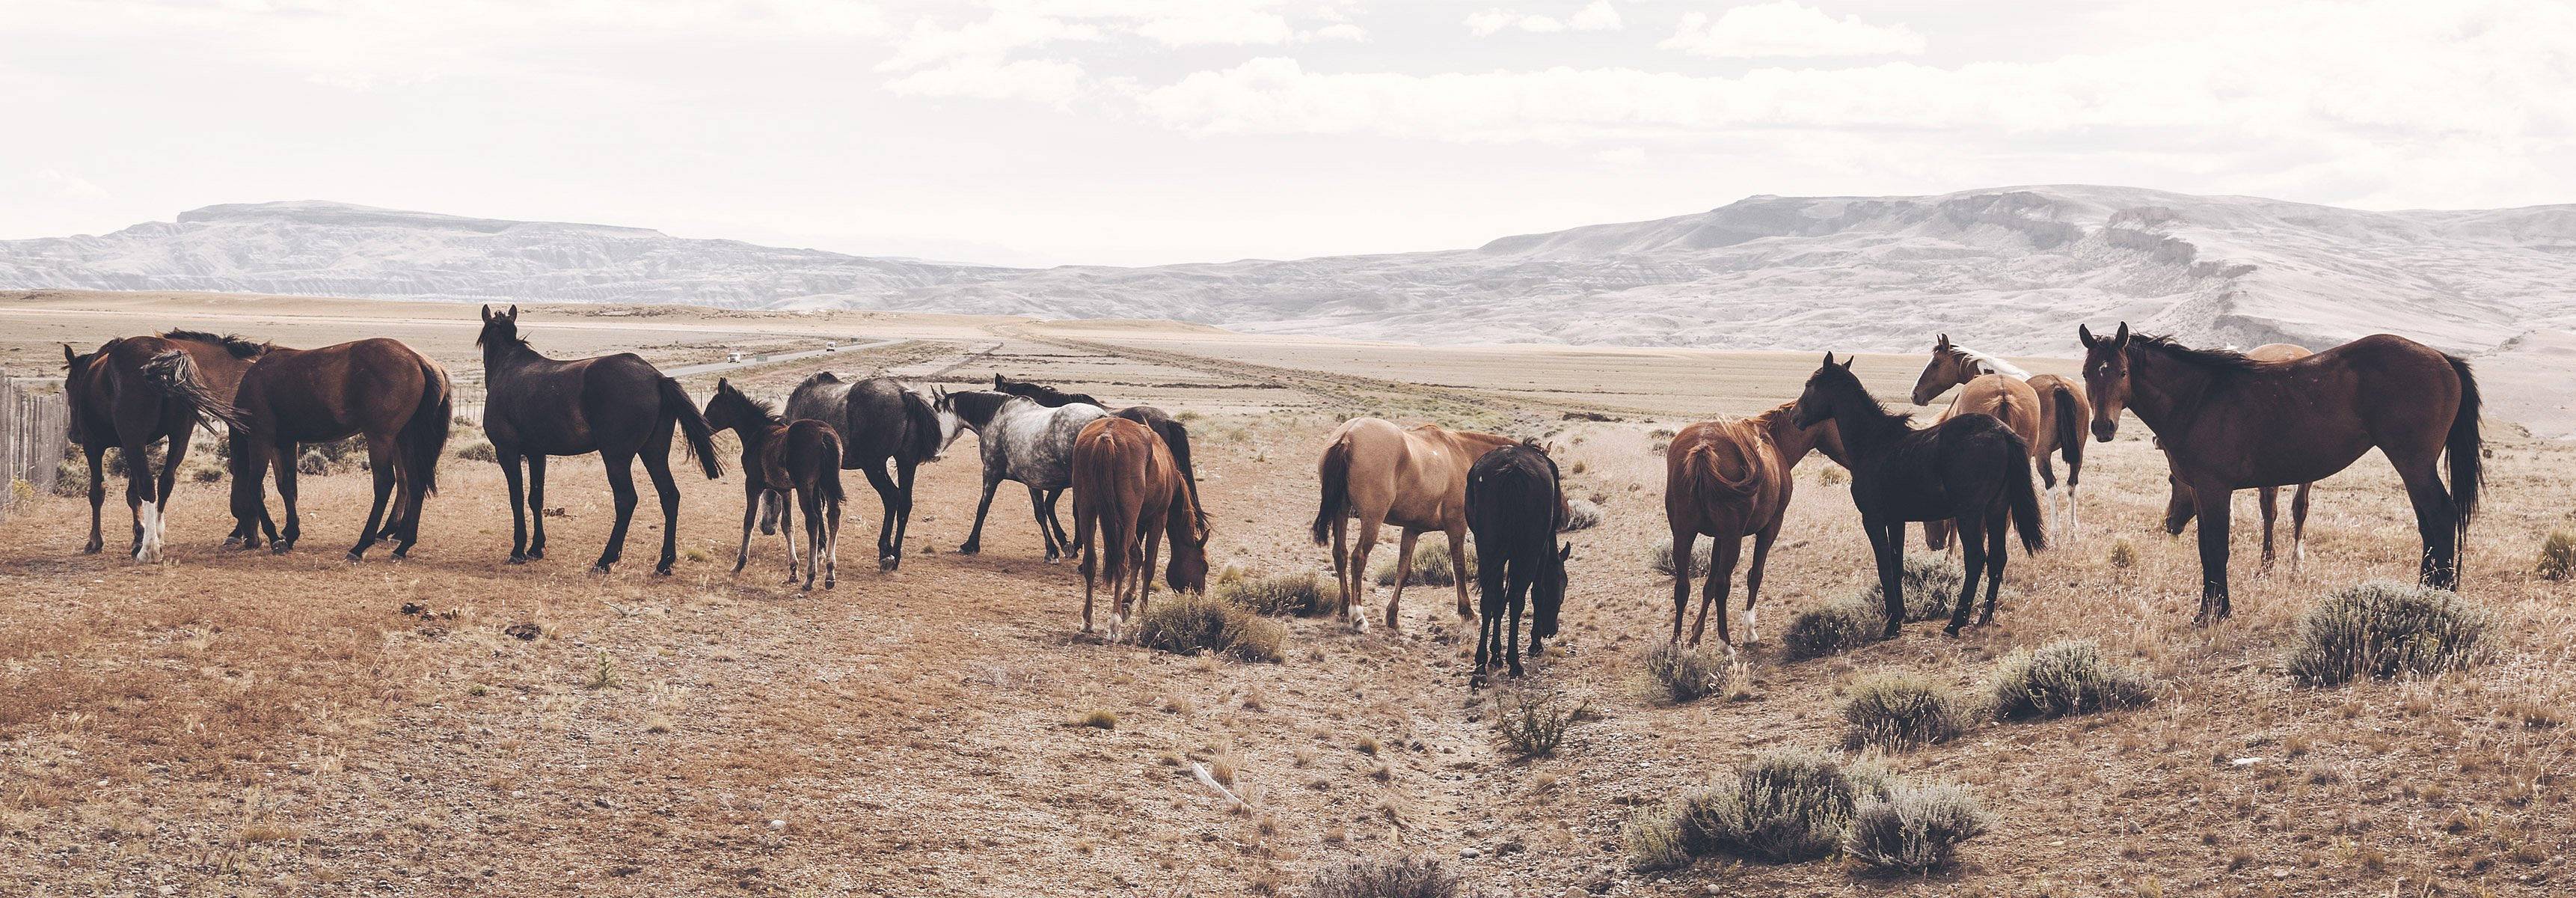 Wild horses in the pampa